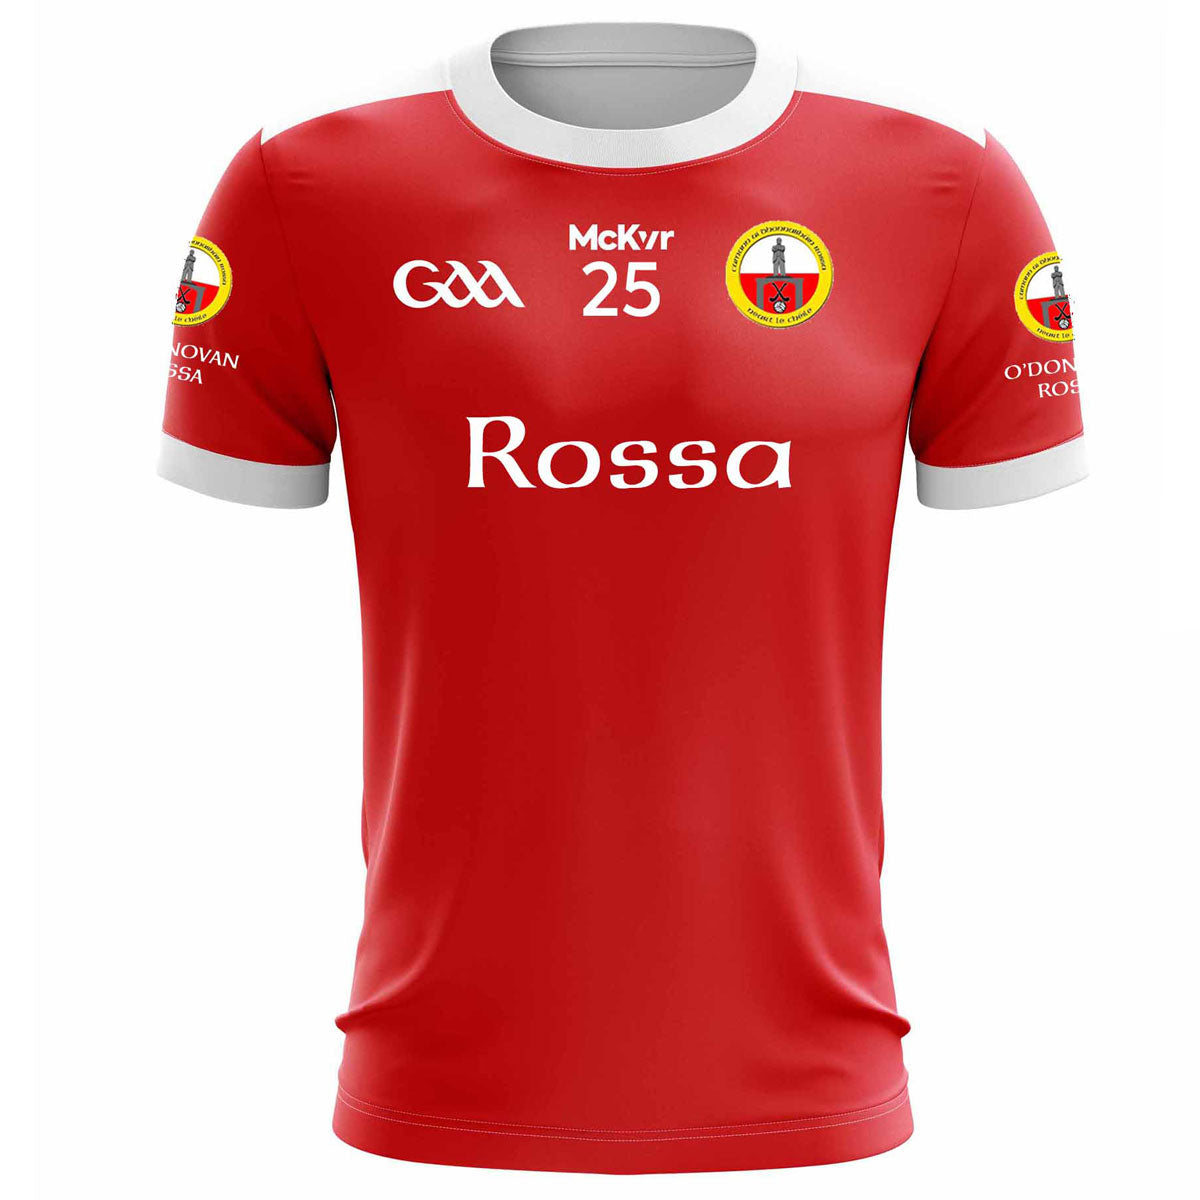 Mc Keever O'Donovan Rossa GAA Numbered Playing Jersey - Adult - Red/White